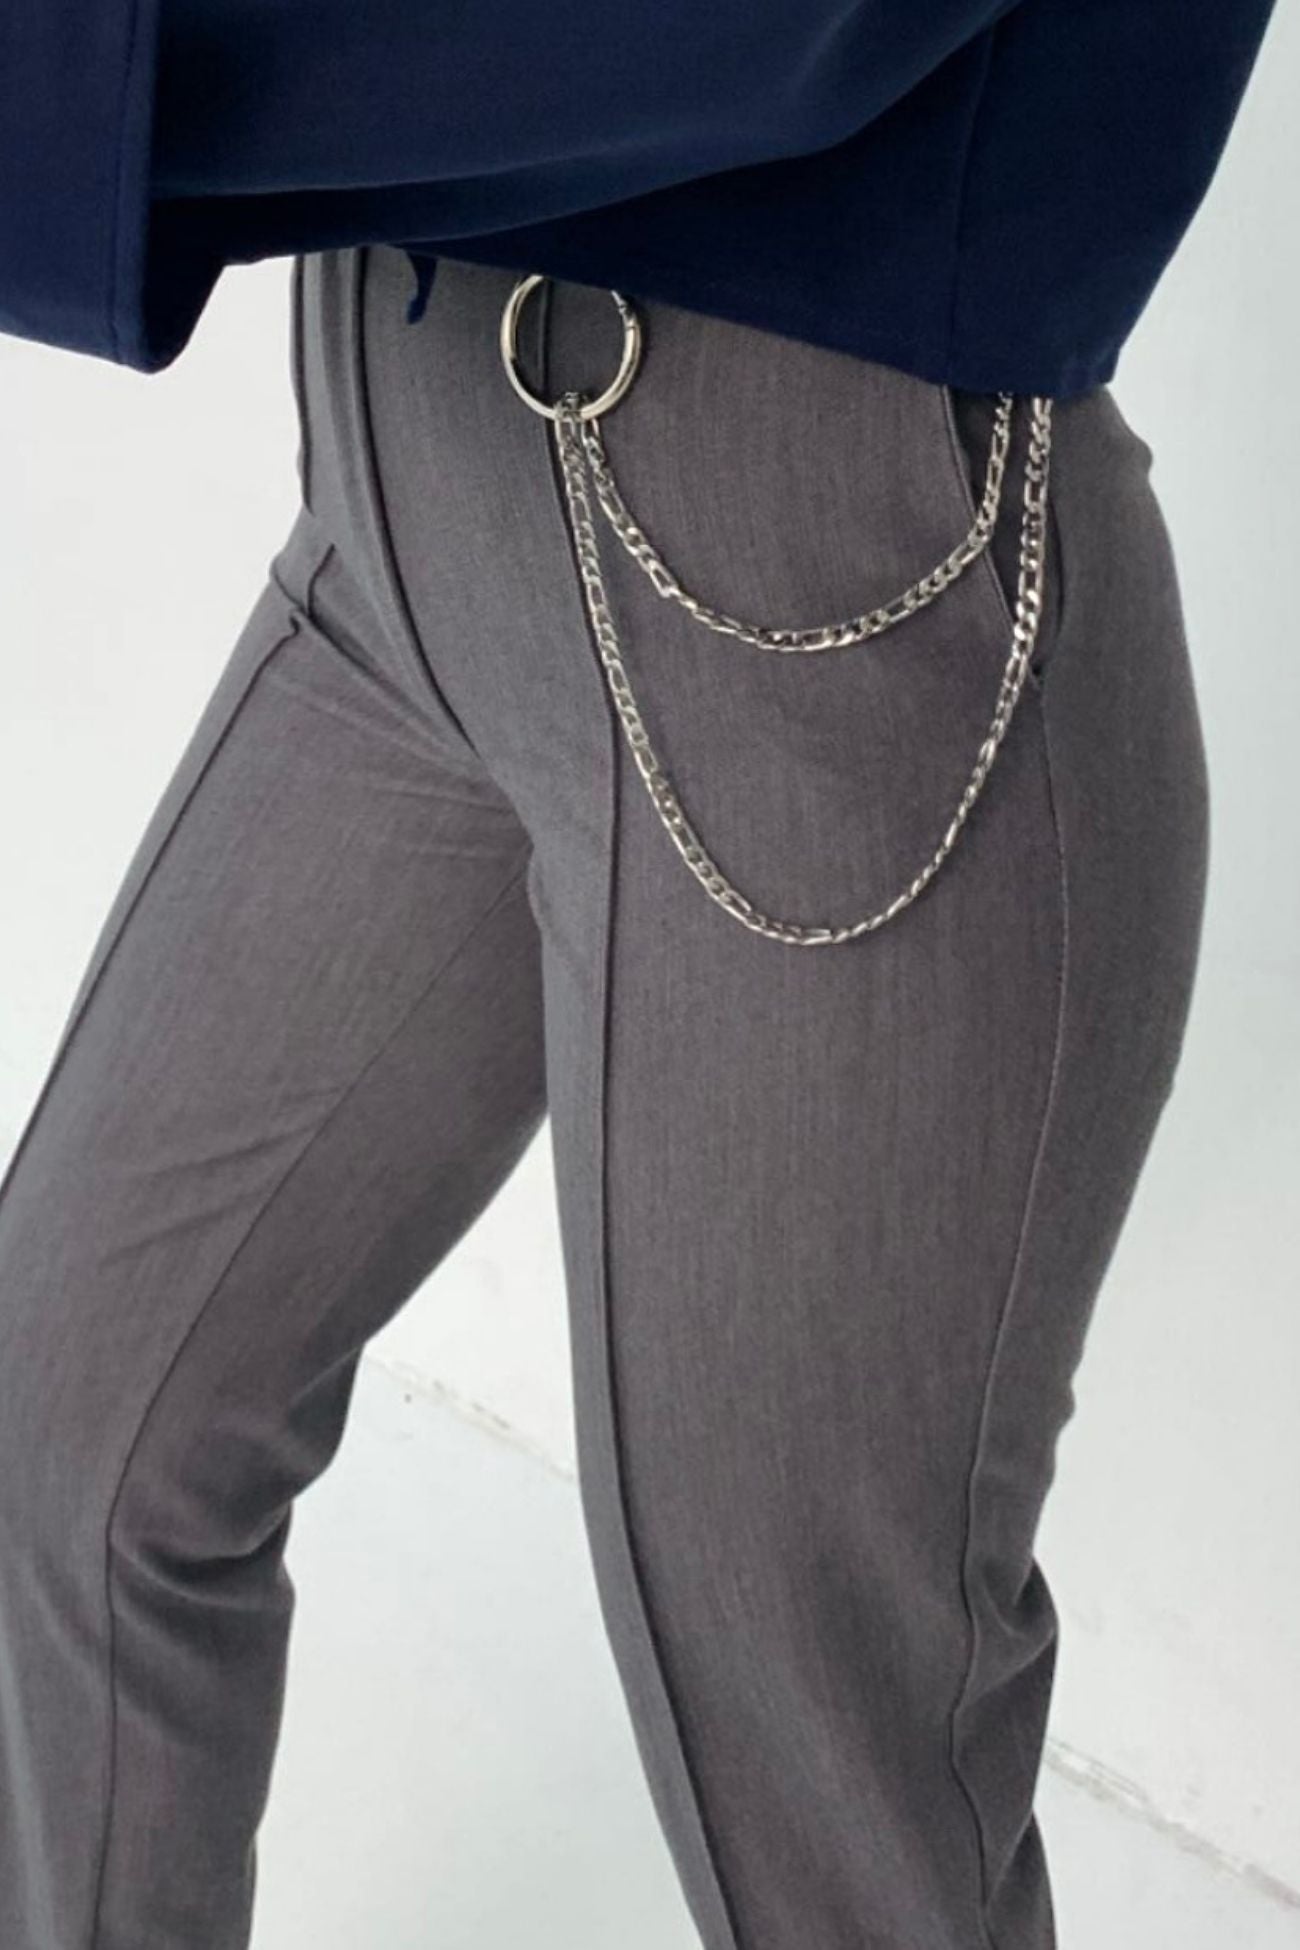 Original Grey High-Waisted Business Pants with Decorative Chain